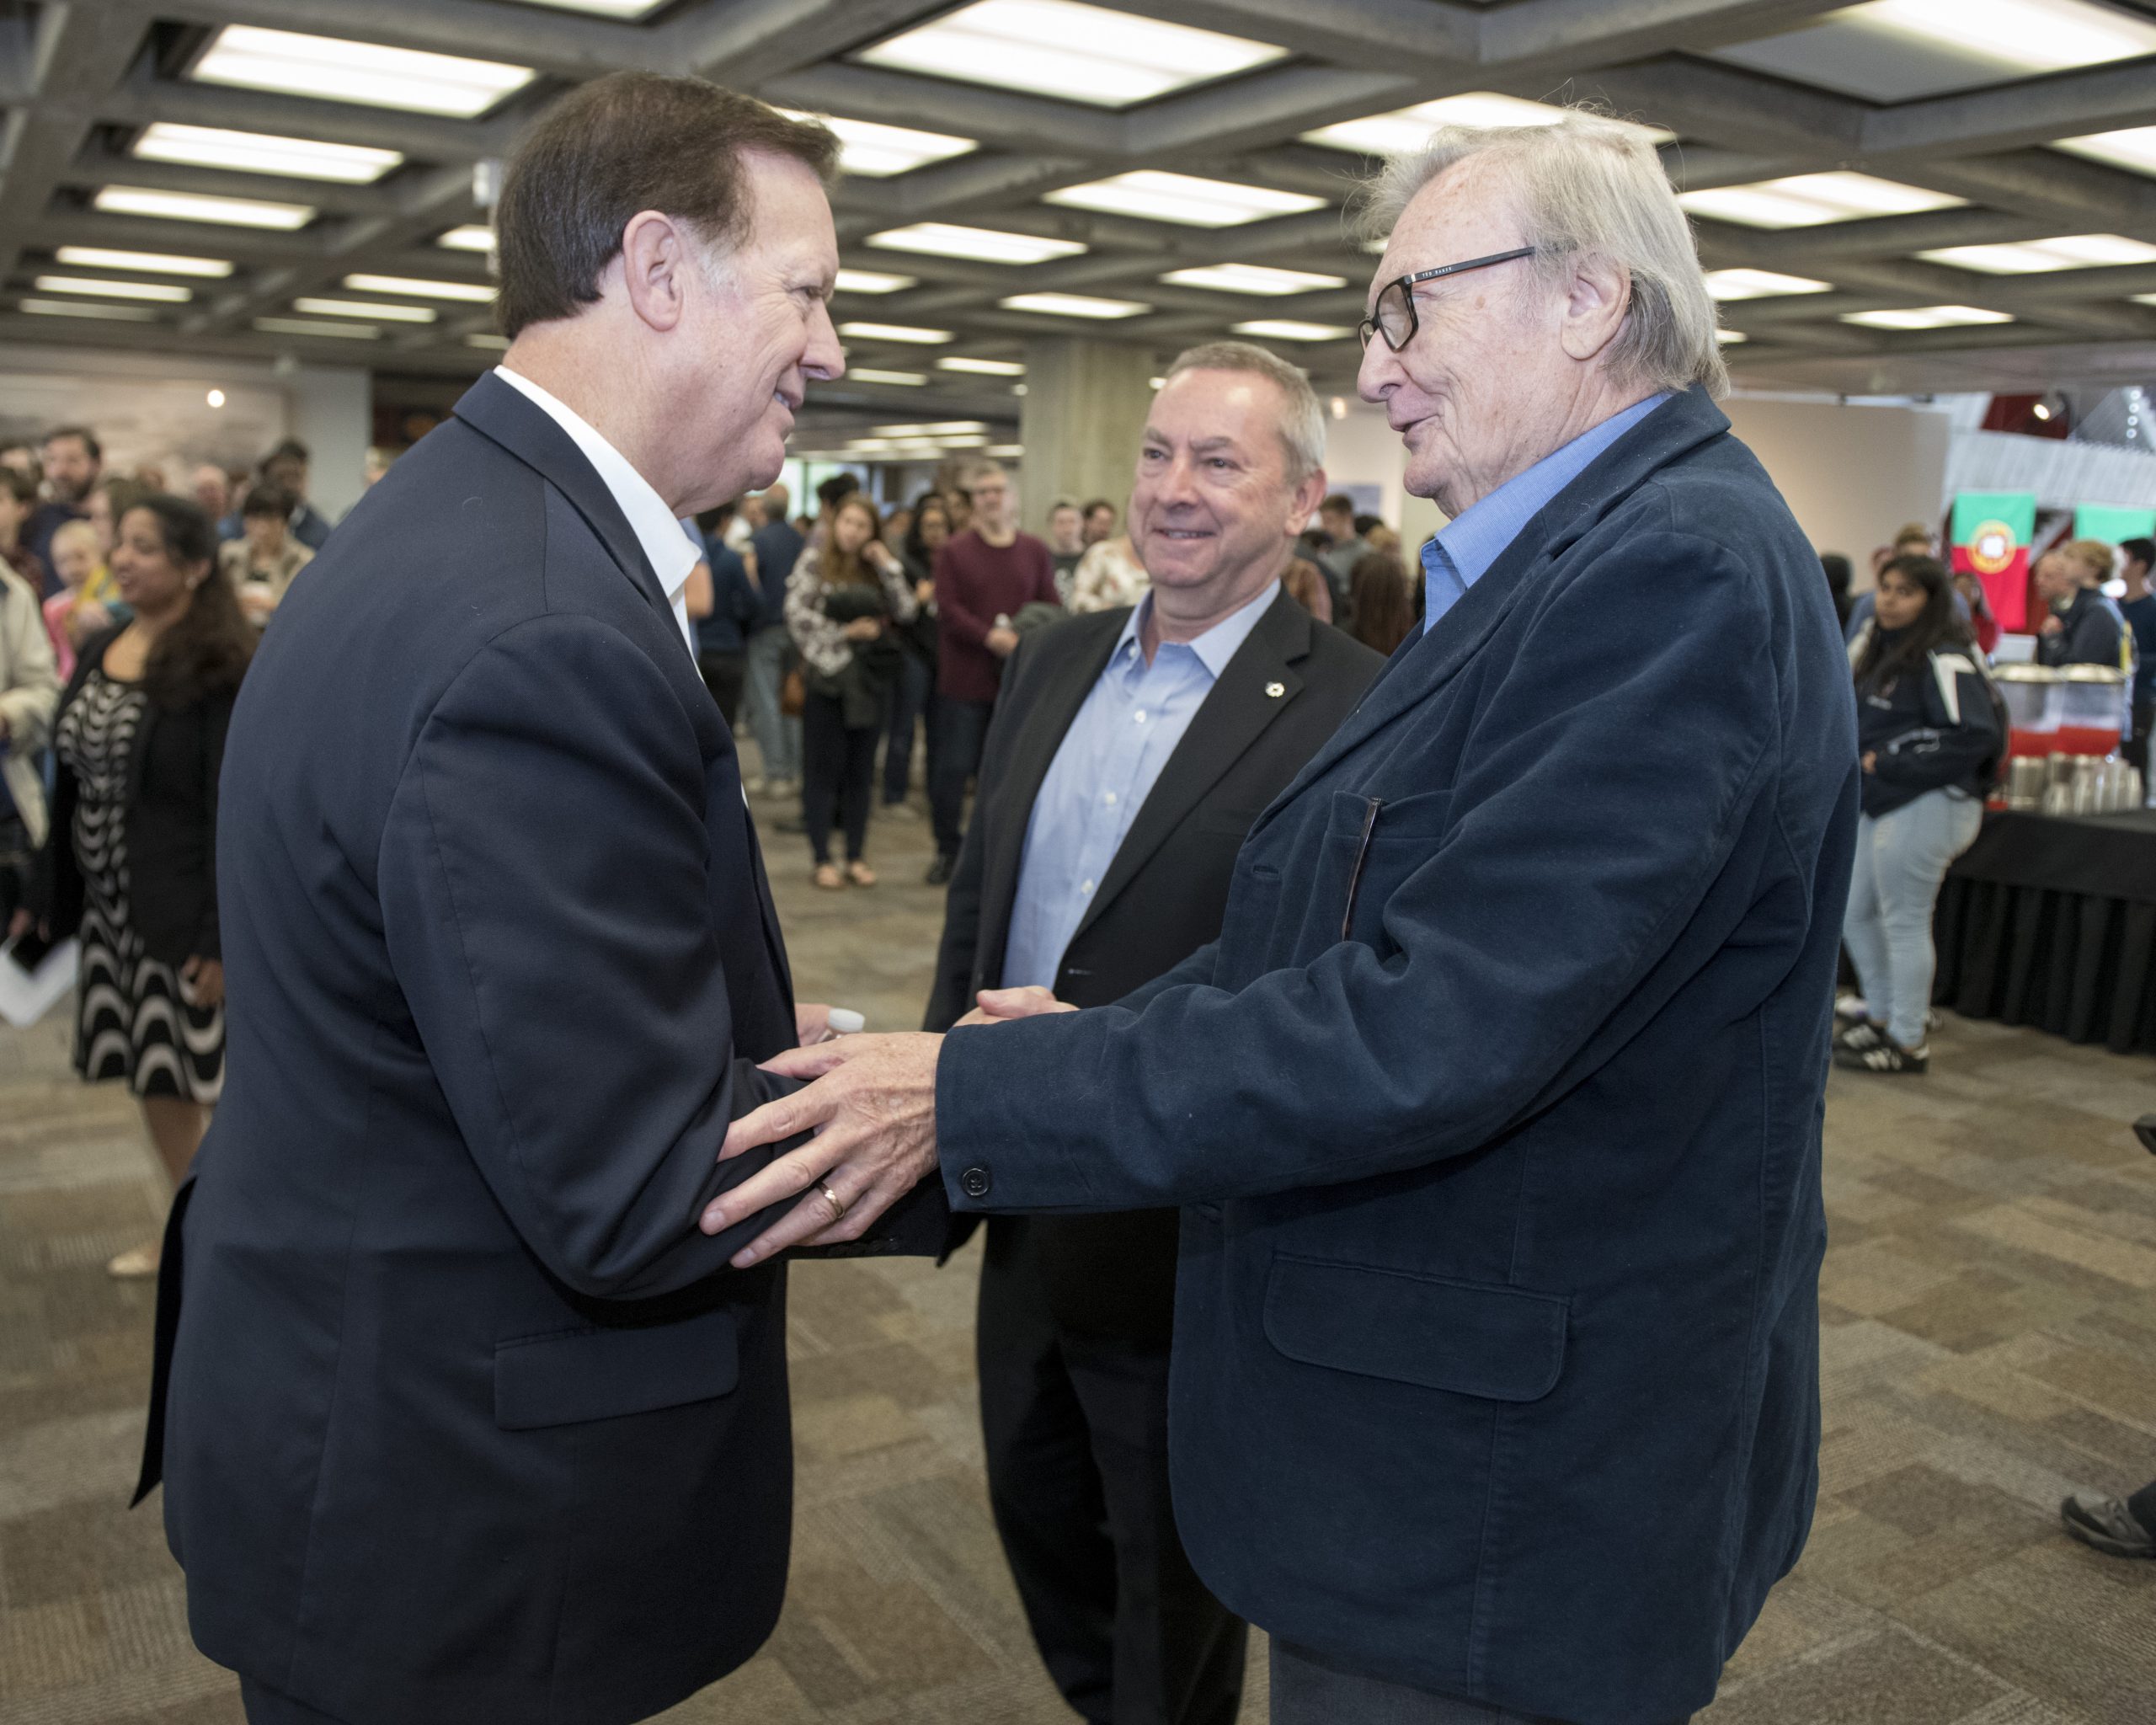 Nobel Prize winner Carlo Rubbia greeted House Science Committee member Randy Weber, Chair of the Energy Subcommittee, at the reception for Saturday Morning Physics students. Photo: Reidar Hahn